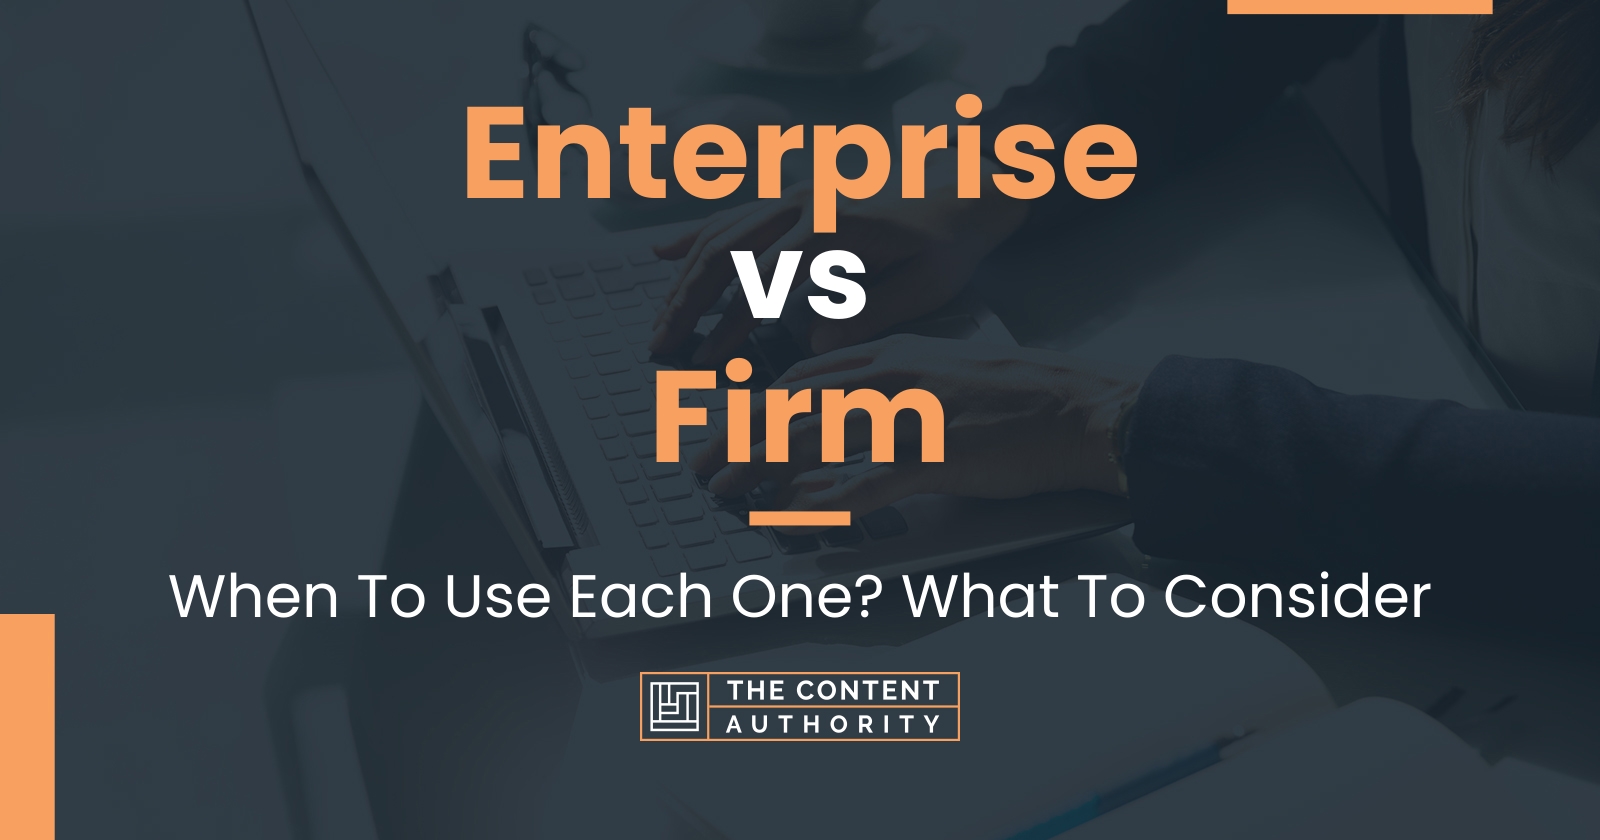 Enterprise vs Firm: When To Use Each One? What To Consider